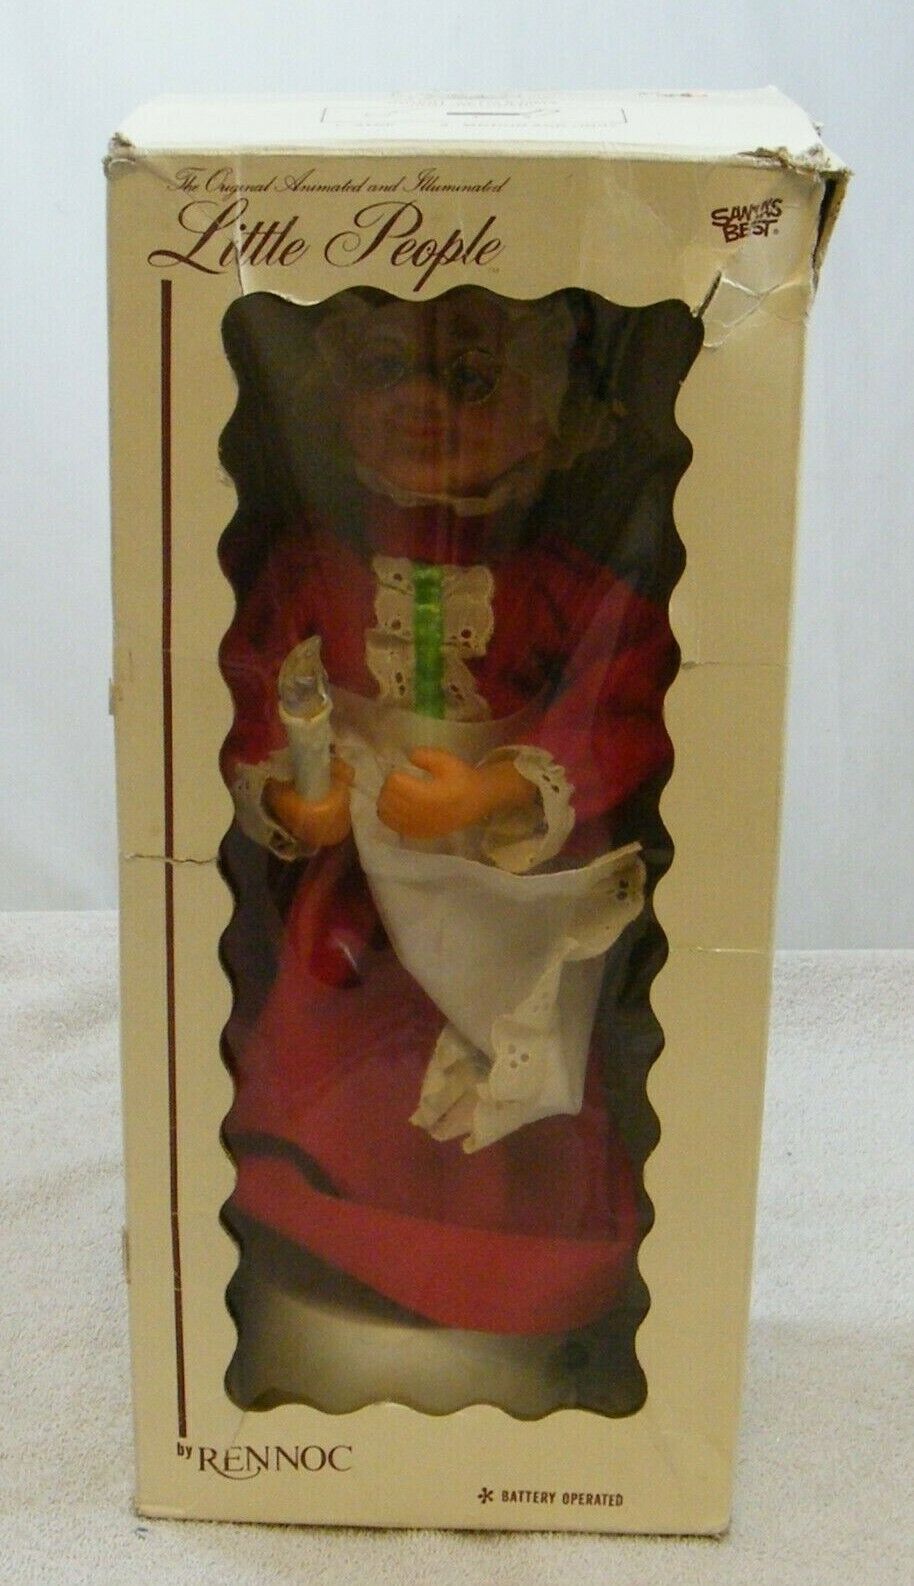 VINTAGE LITTLE PEOPLE BY RENNOC CHRISTMAS LADY RED DRESS PLAYS MUSIC DOESNT WORK